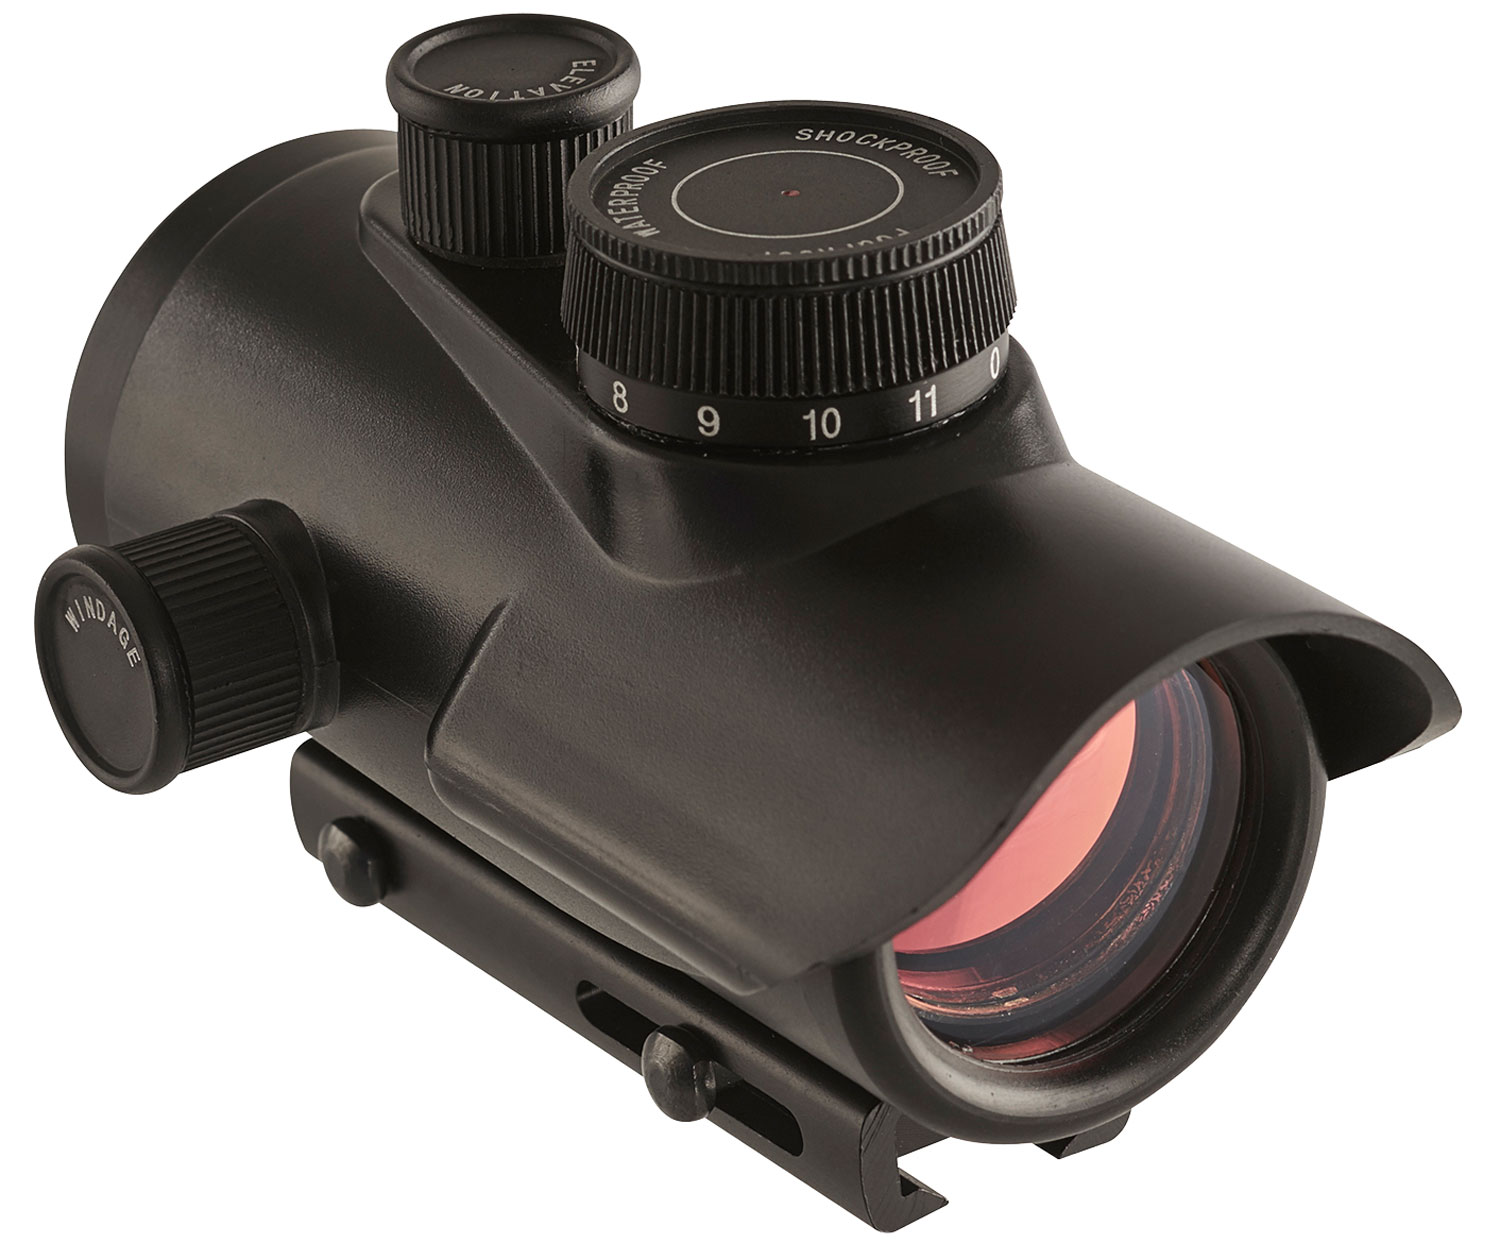 Axeon 2218639 1XRDS  Black 1x30mm 5 MOA Red Dot Reticle